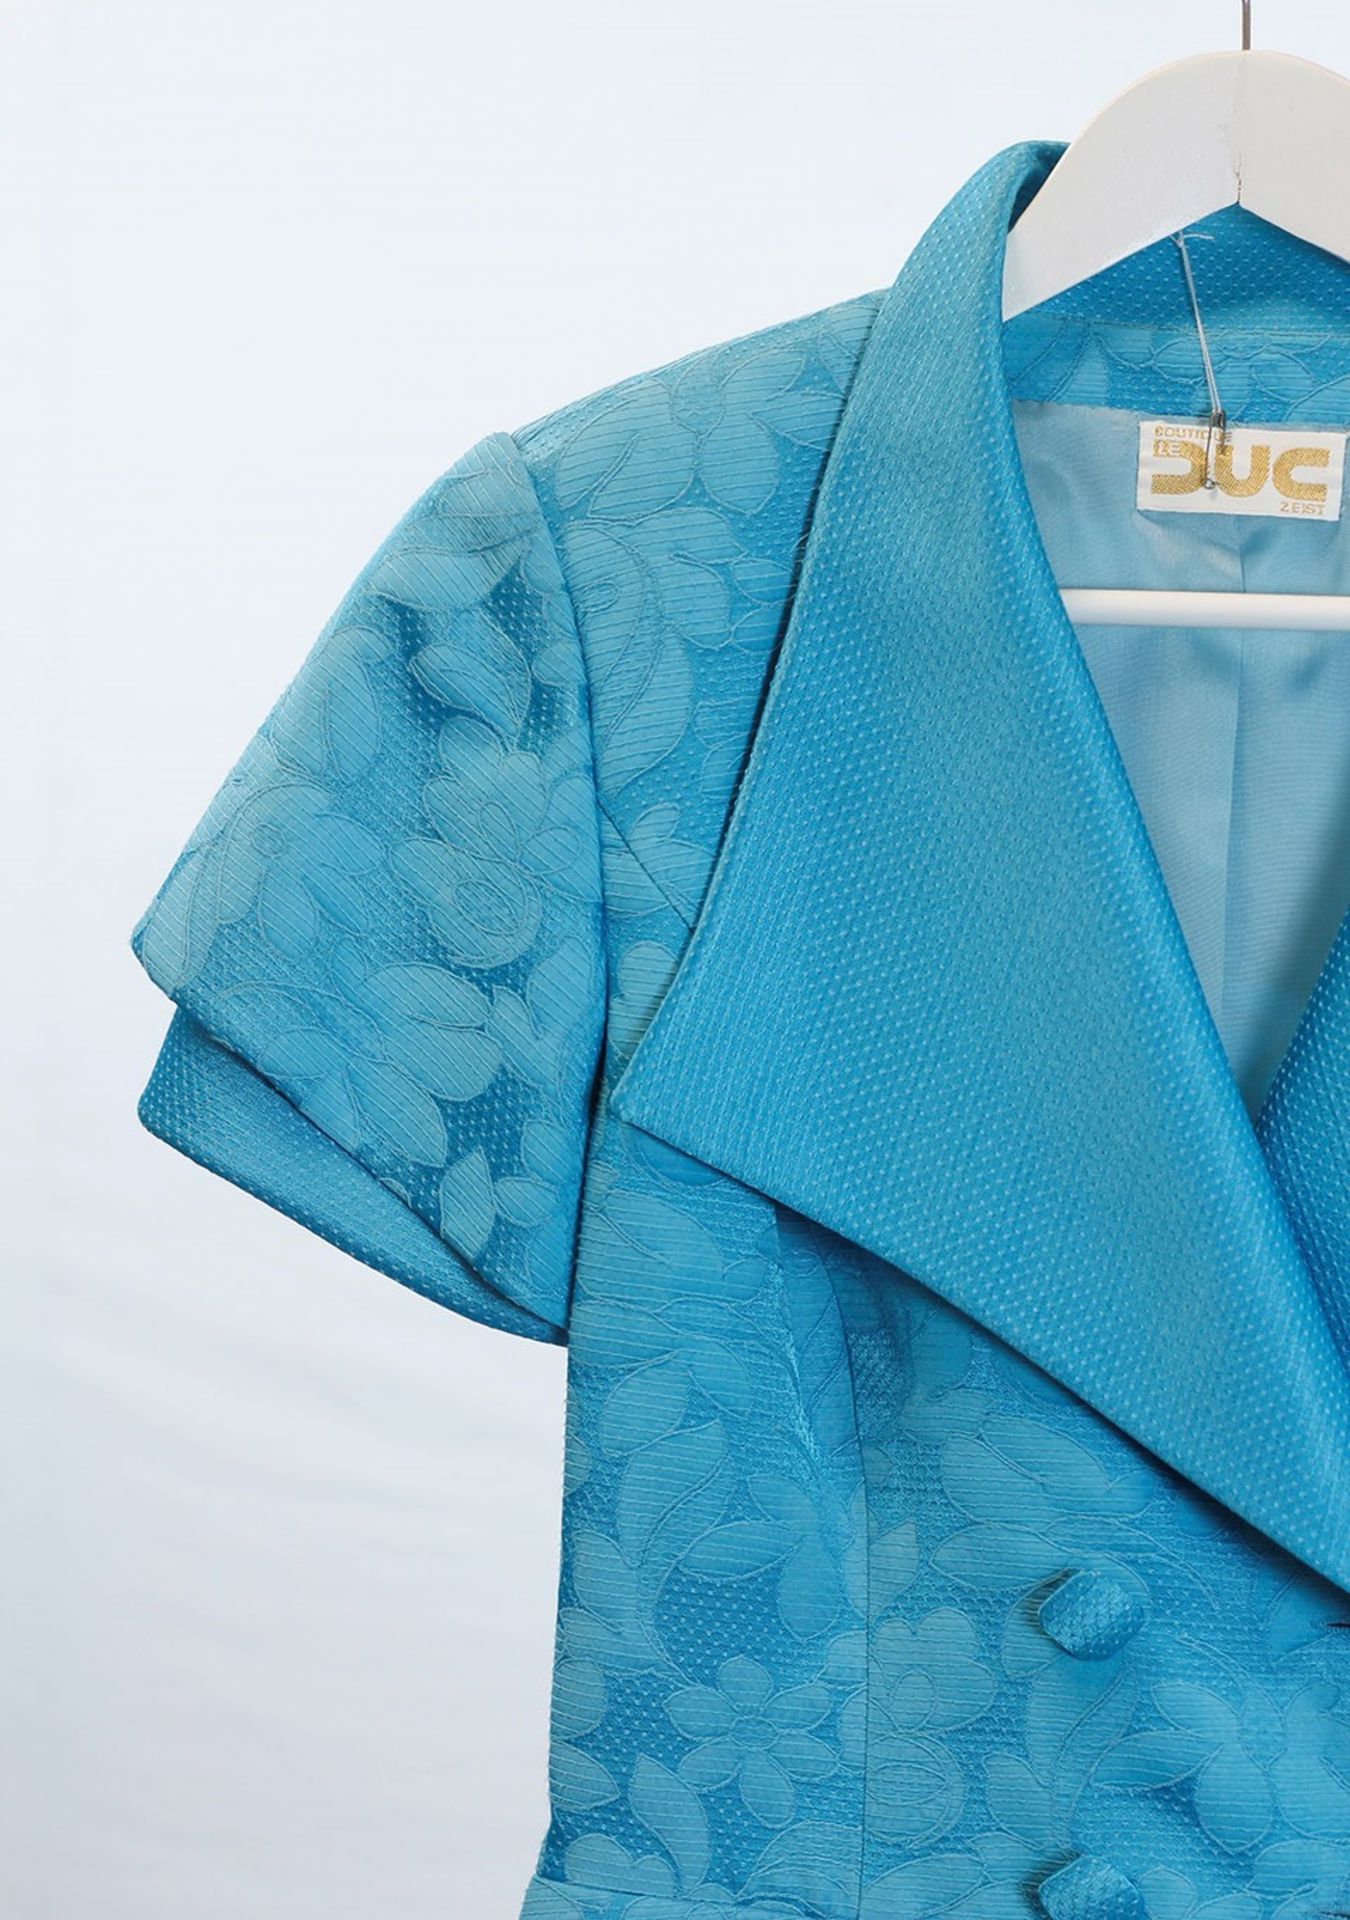 1 x Boutique Le Duc Blue Skirt Suit - Size: 12 - Material: 100% Cotton - From a High End Clothing - Image 3 of 14